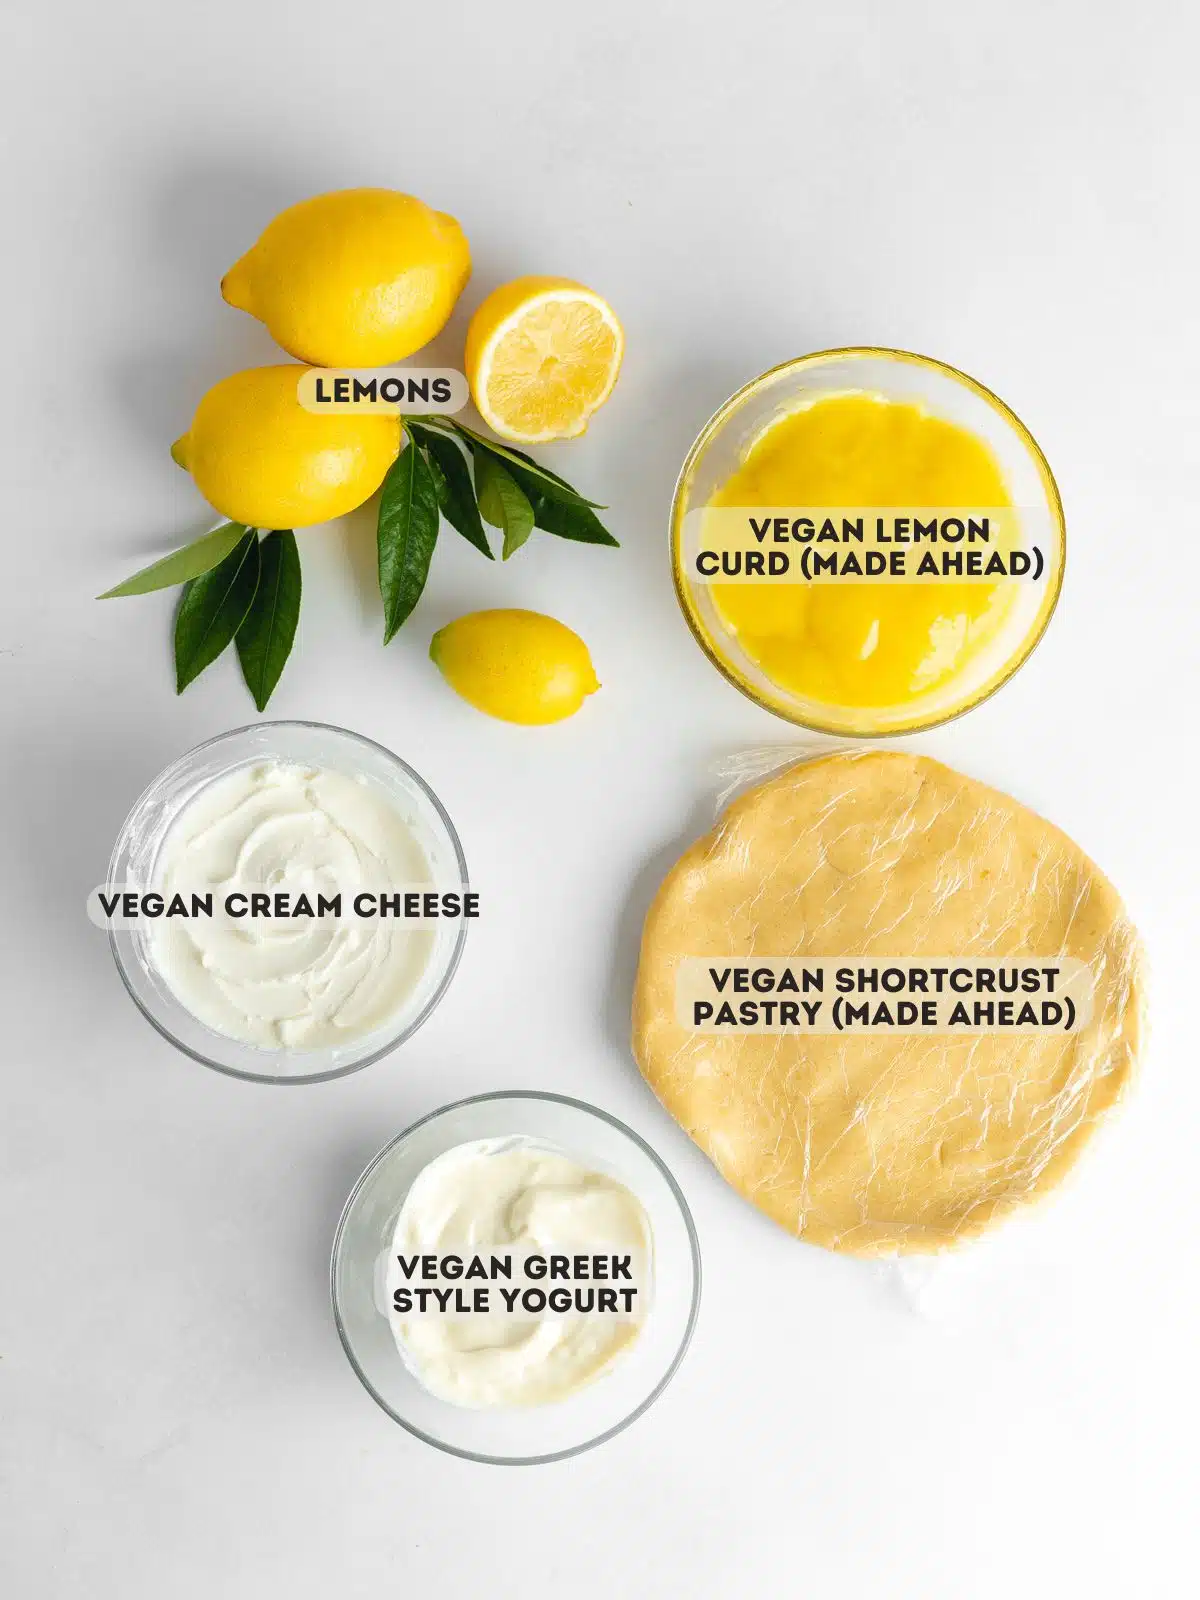 ingredients to make vegan lemon tart measured out in bowls on a light gray surface with text overlay.